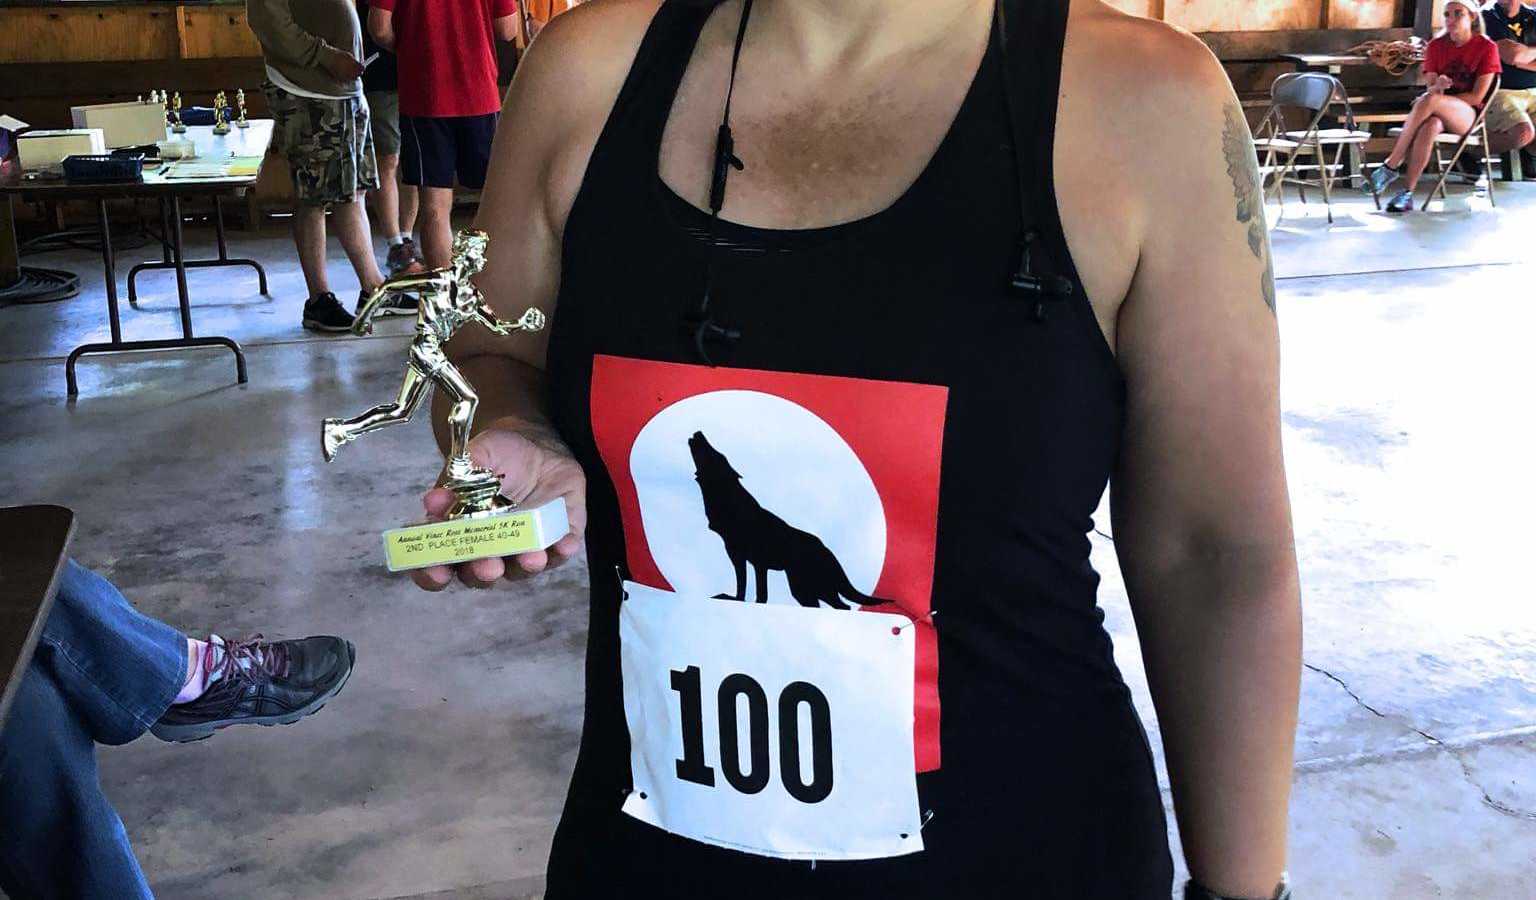 A woman wearing a black tanktop holds a trophy after running a race. On her shirt is a wolf howling.